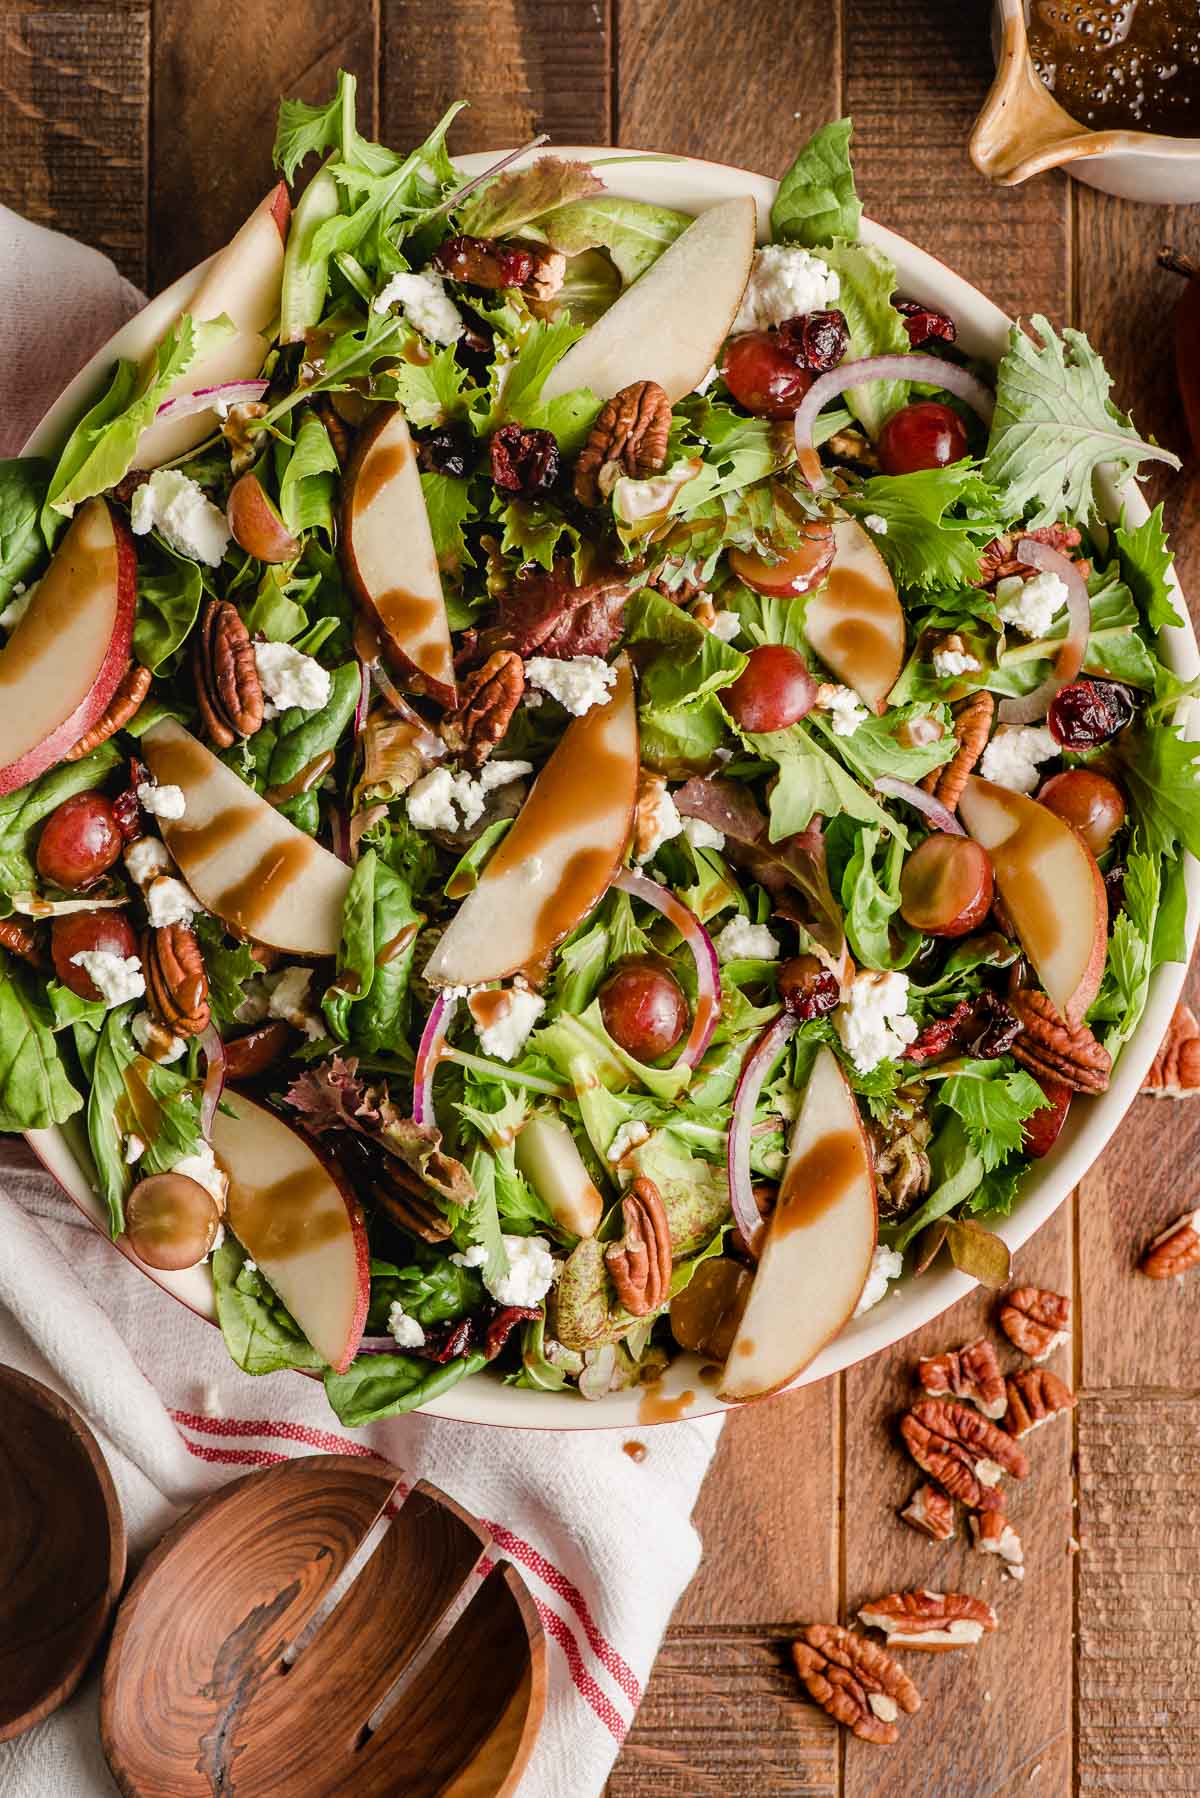 Autumn salad with pears, goat cheese, cranberries, and pecans.